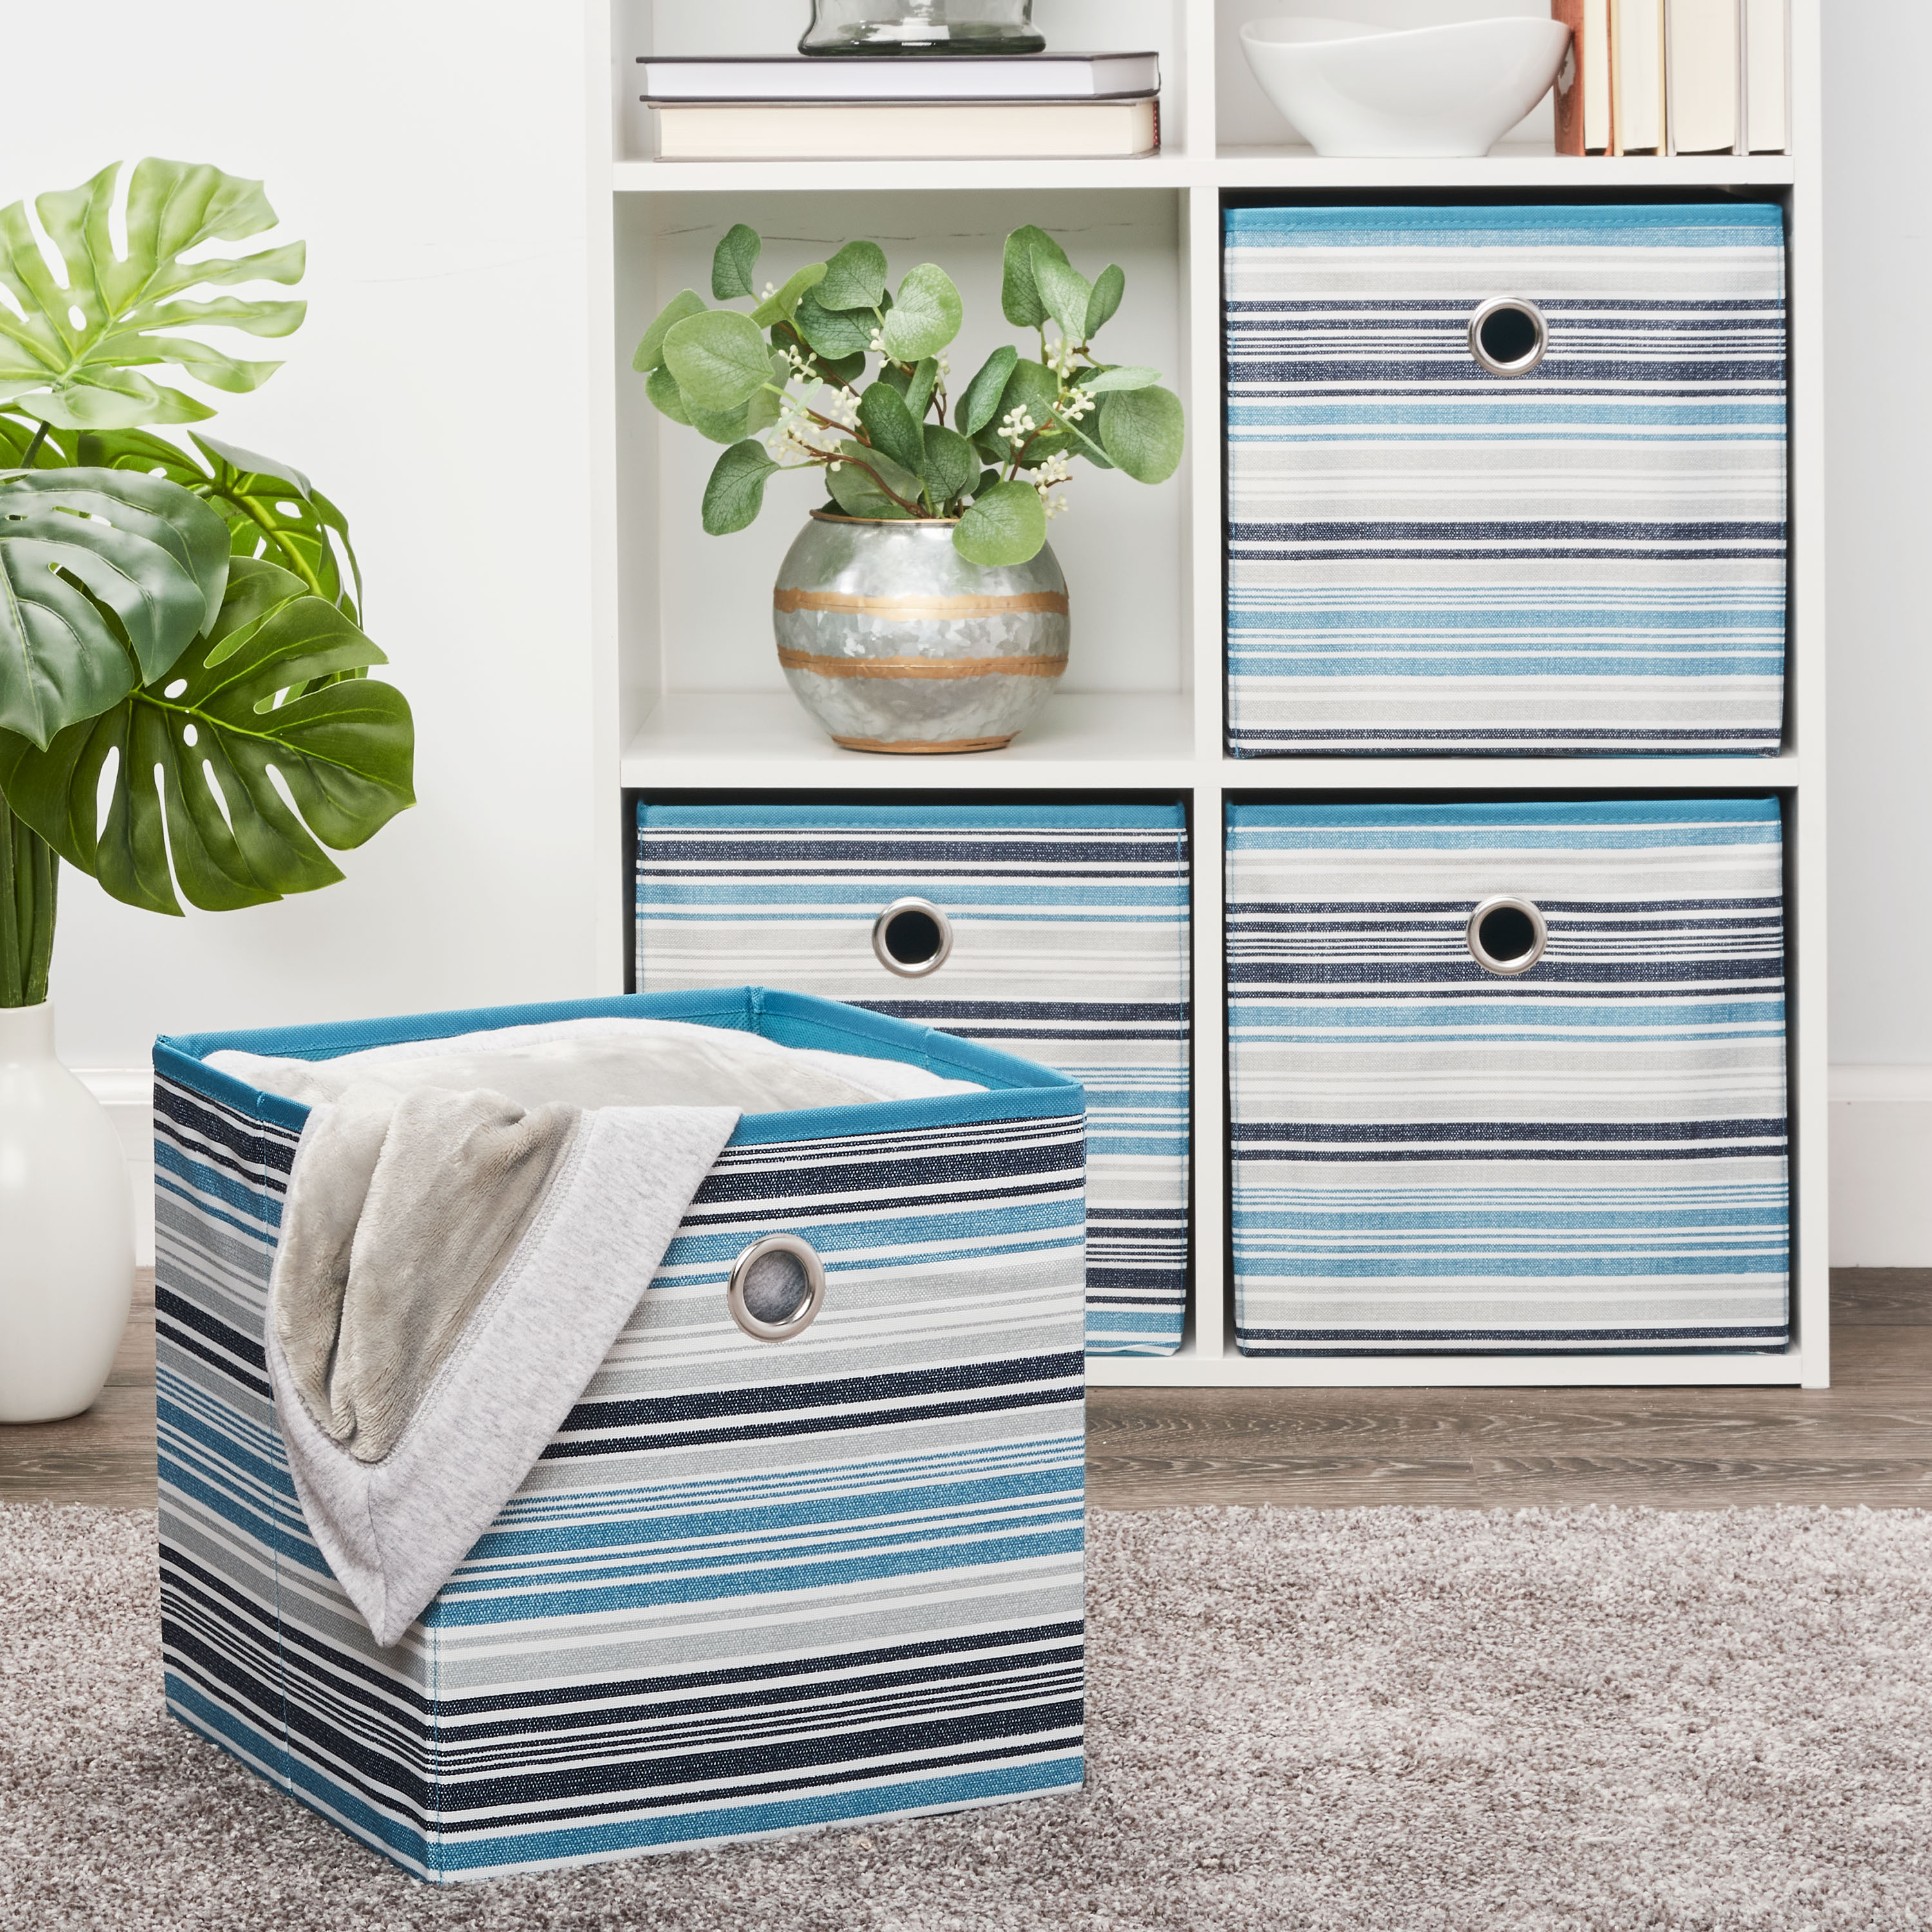 Mainstays Collapsible Fabric Cube Storage Bins (10.5" x 10.5"), Striped Cool Water, 4 Pack - image 5 of 5